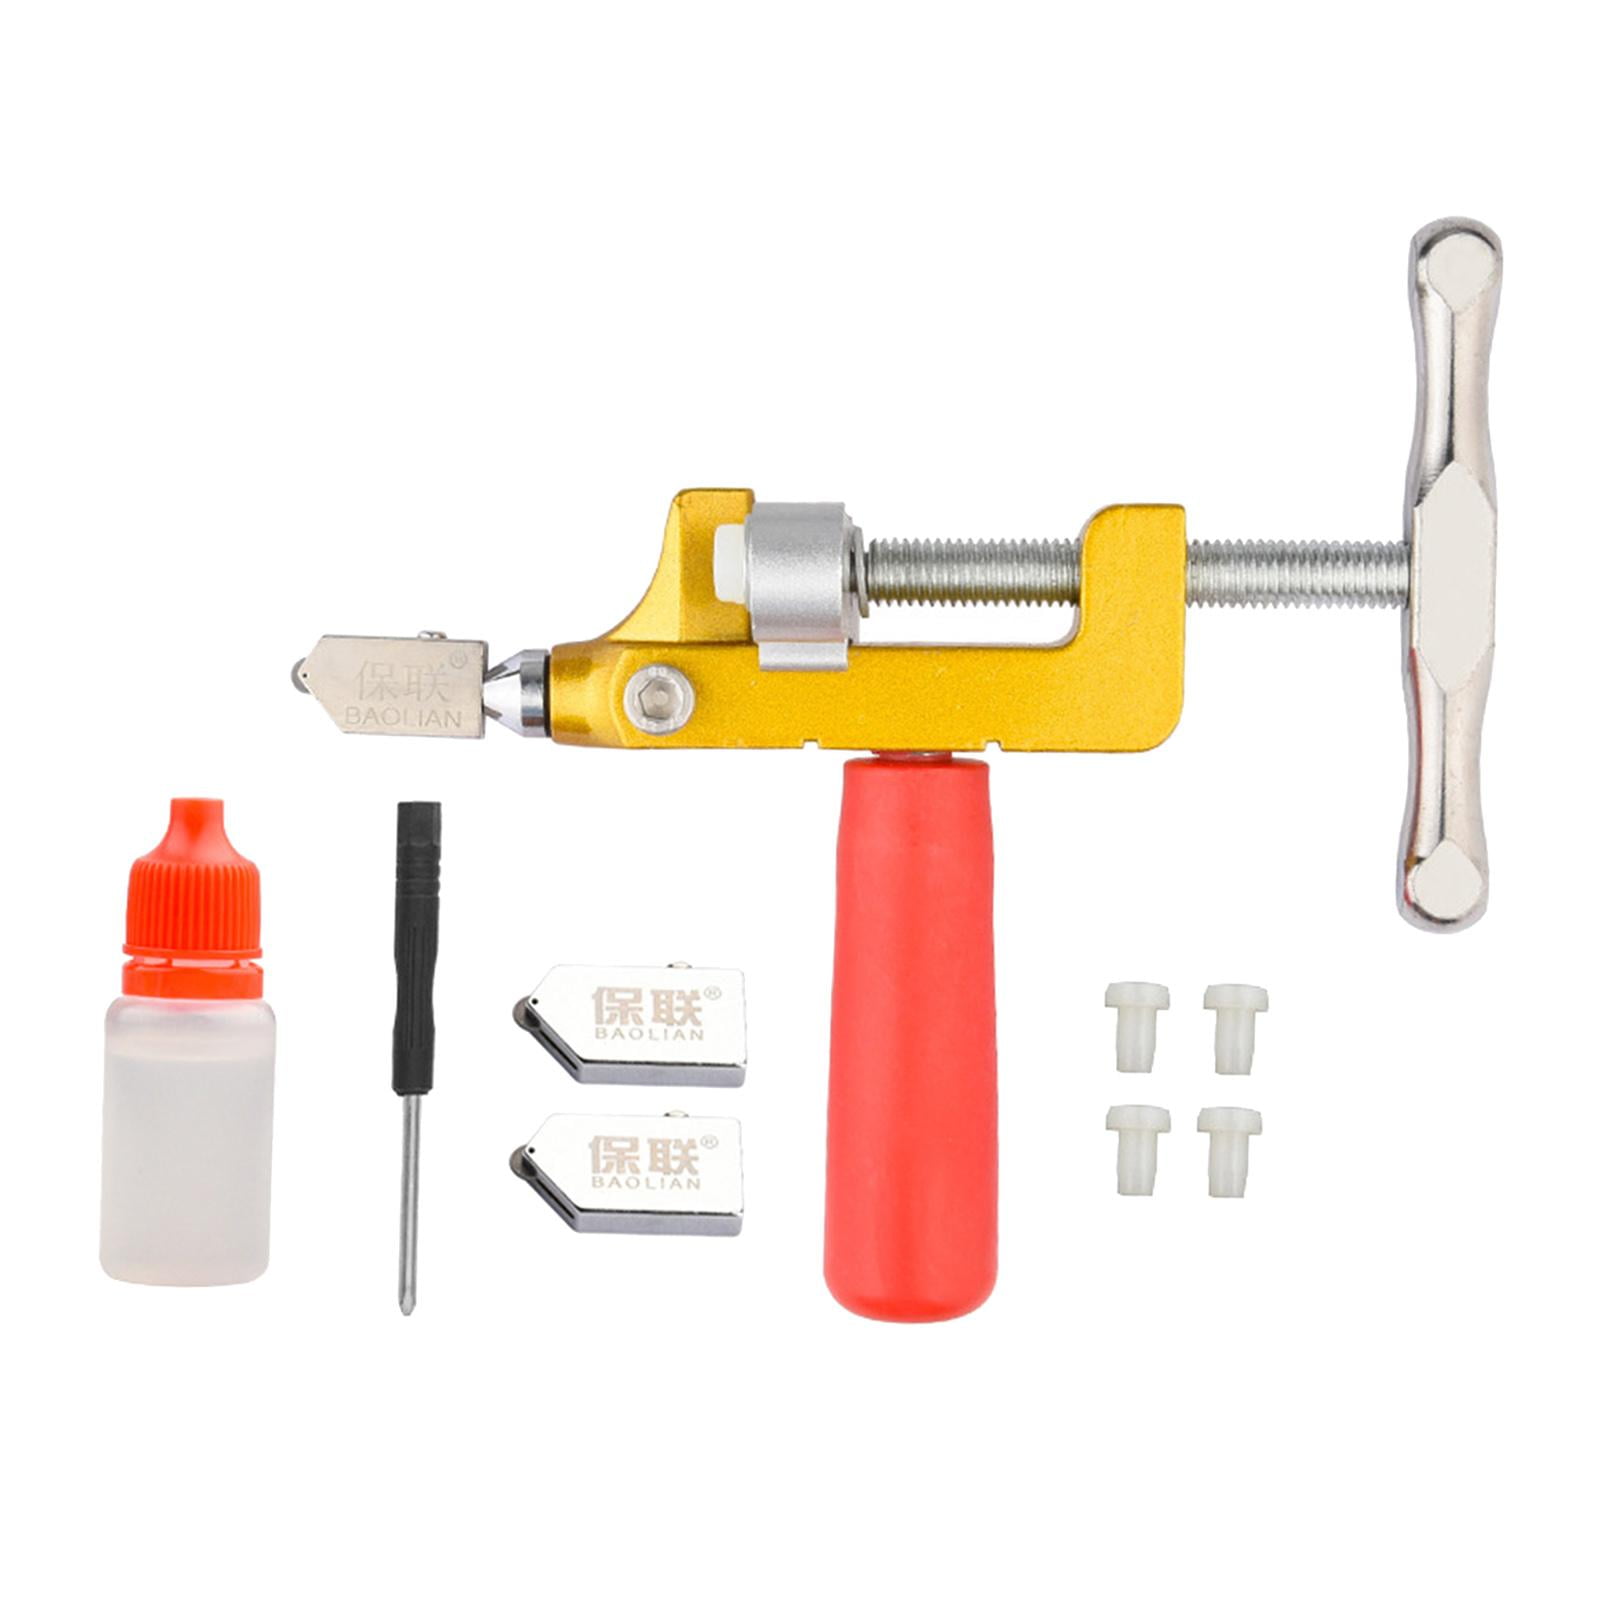  Glass Cutters 2-22mm- Glass Cutter Tool for Thick Glass Tiles  Mirror Mosaic Cutting, Glass Cutting Tool with Aotomatic Oil Feed and  Replaceable 3 Carbide Cutting Heads : Arts, Crafts & Sewing